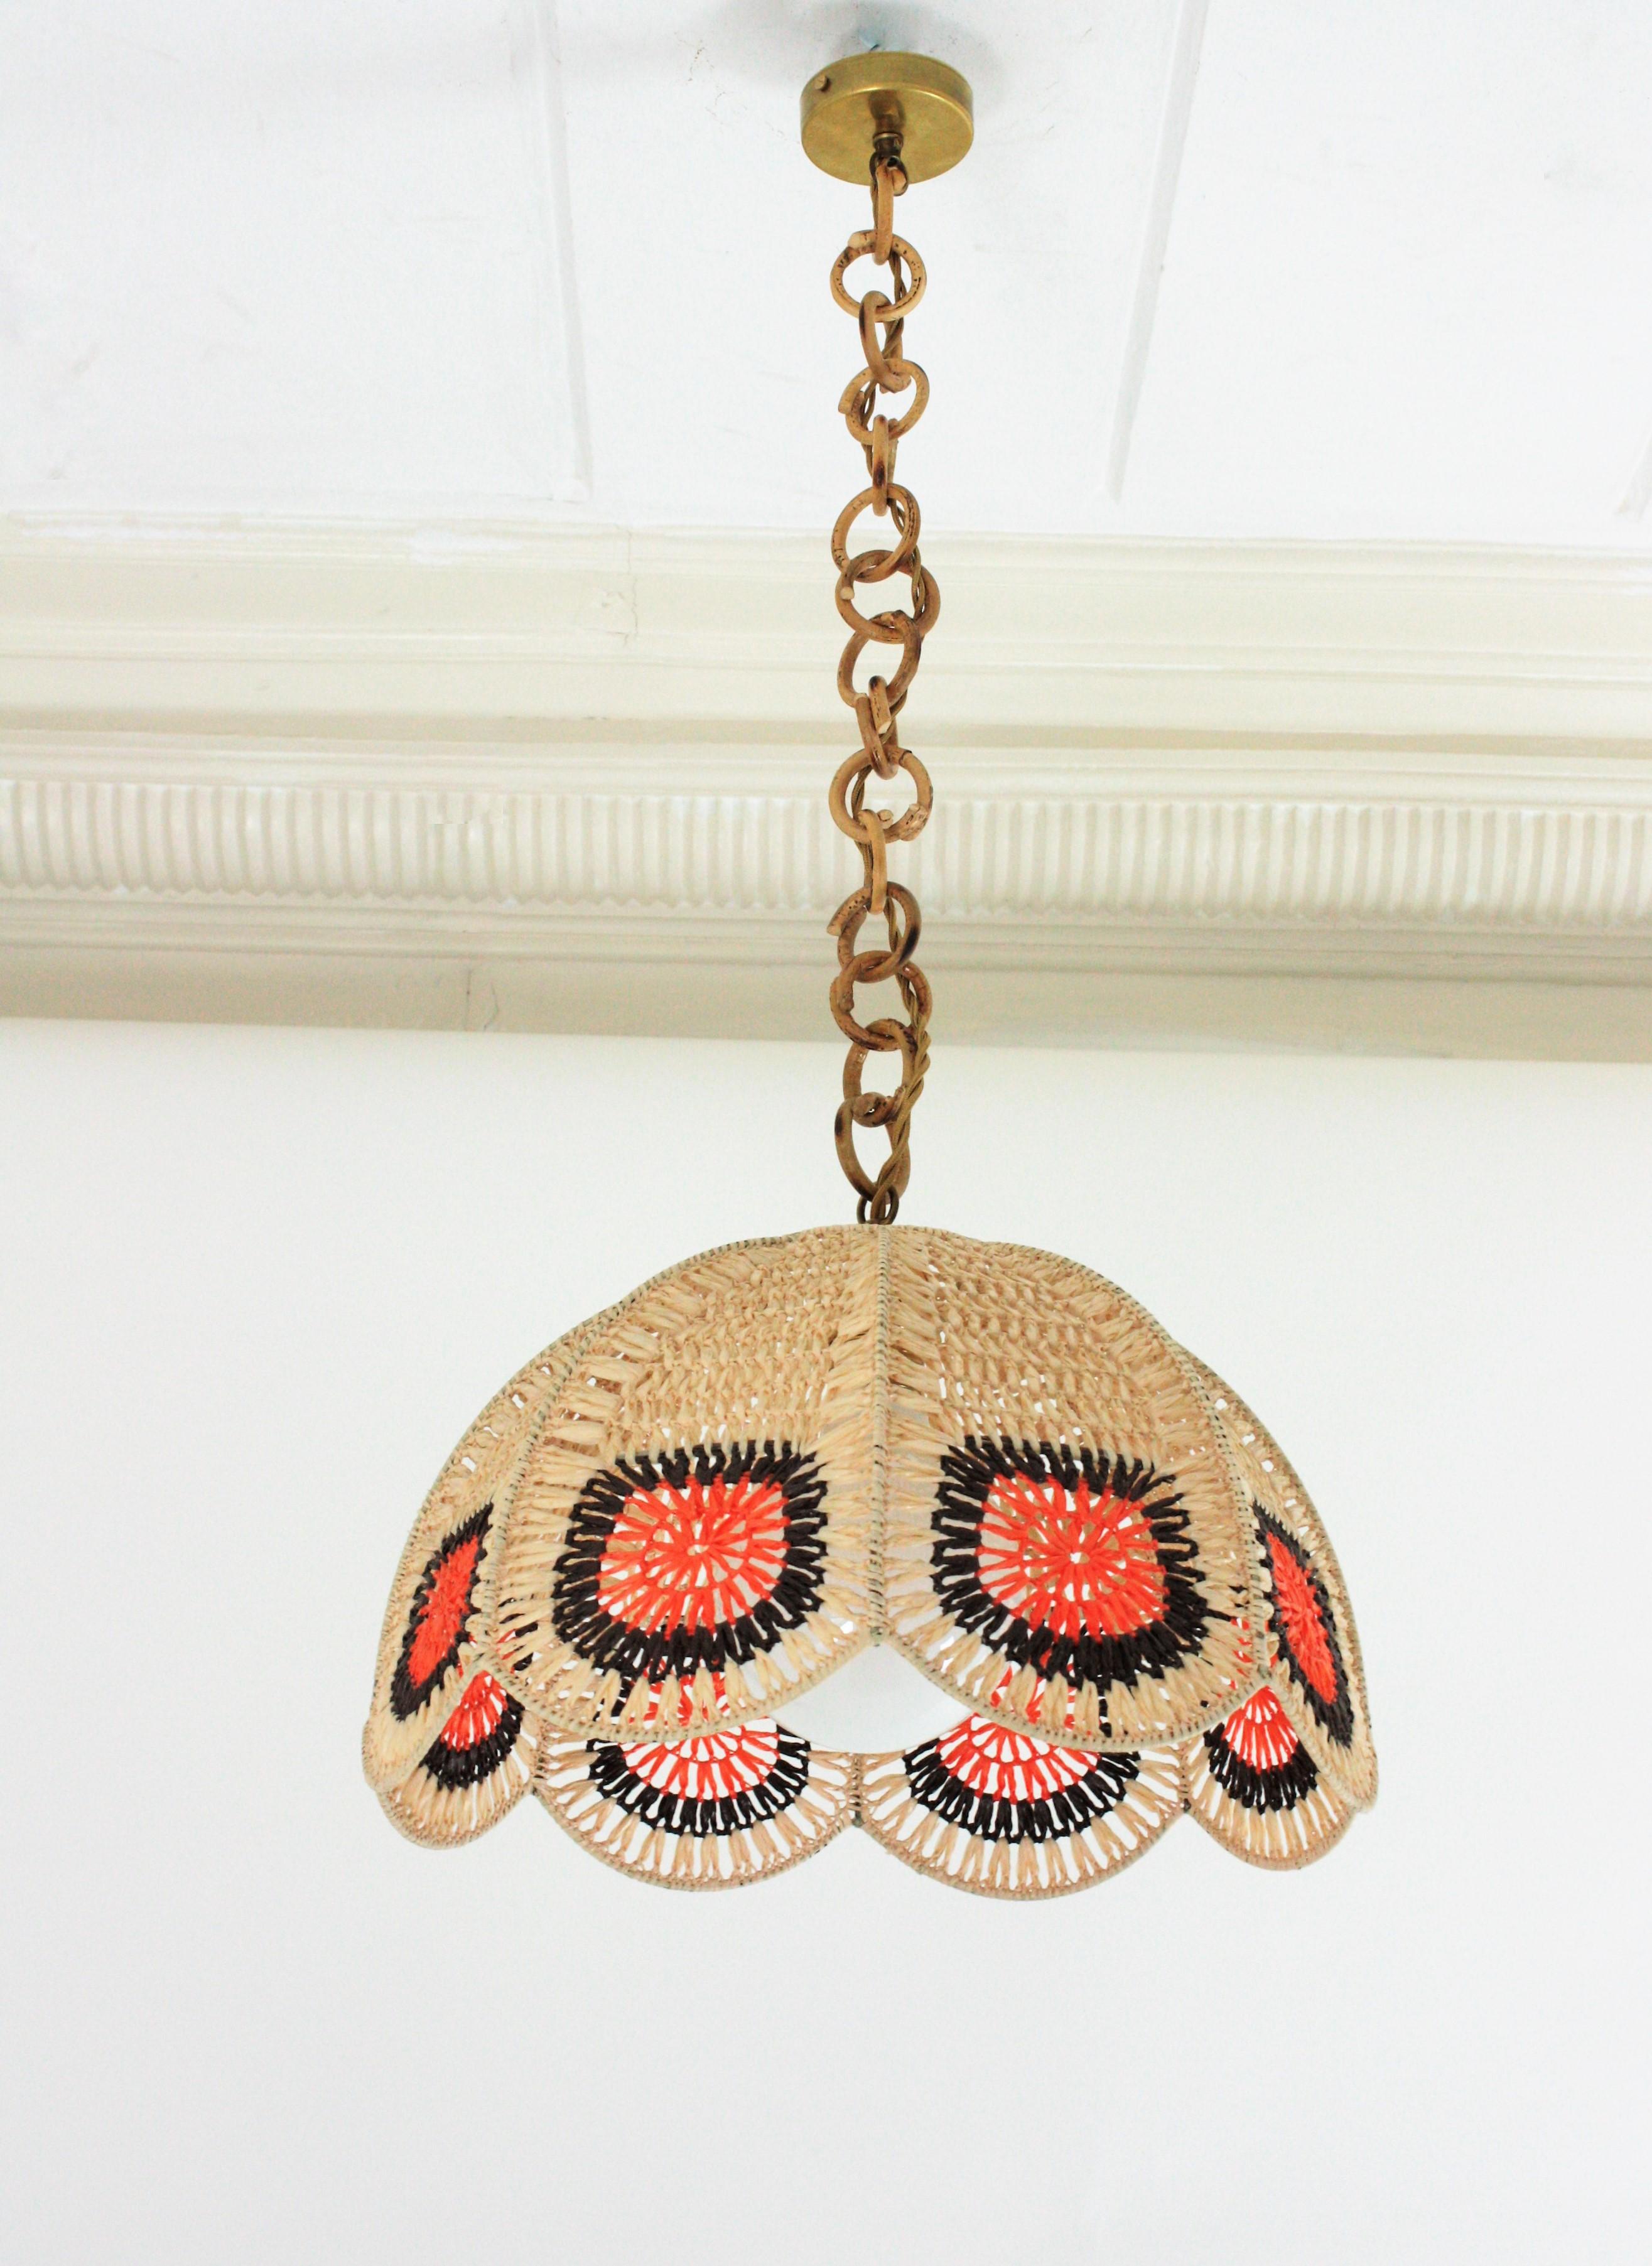 Spanish Modernist Pendant Lamp in Beige, Orange and Brown Macrame For Sale 2